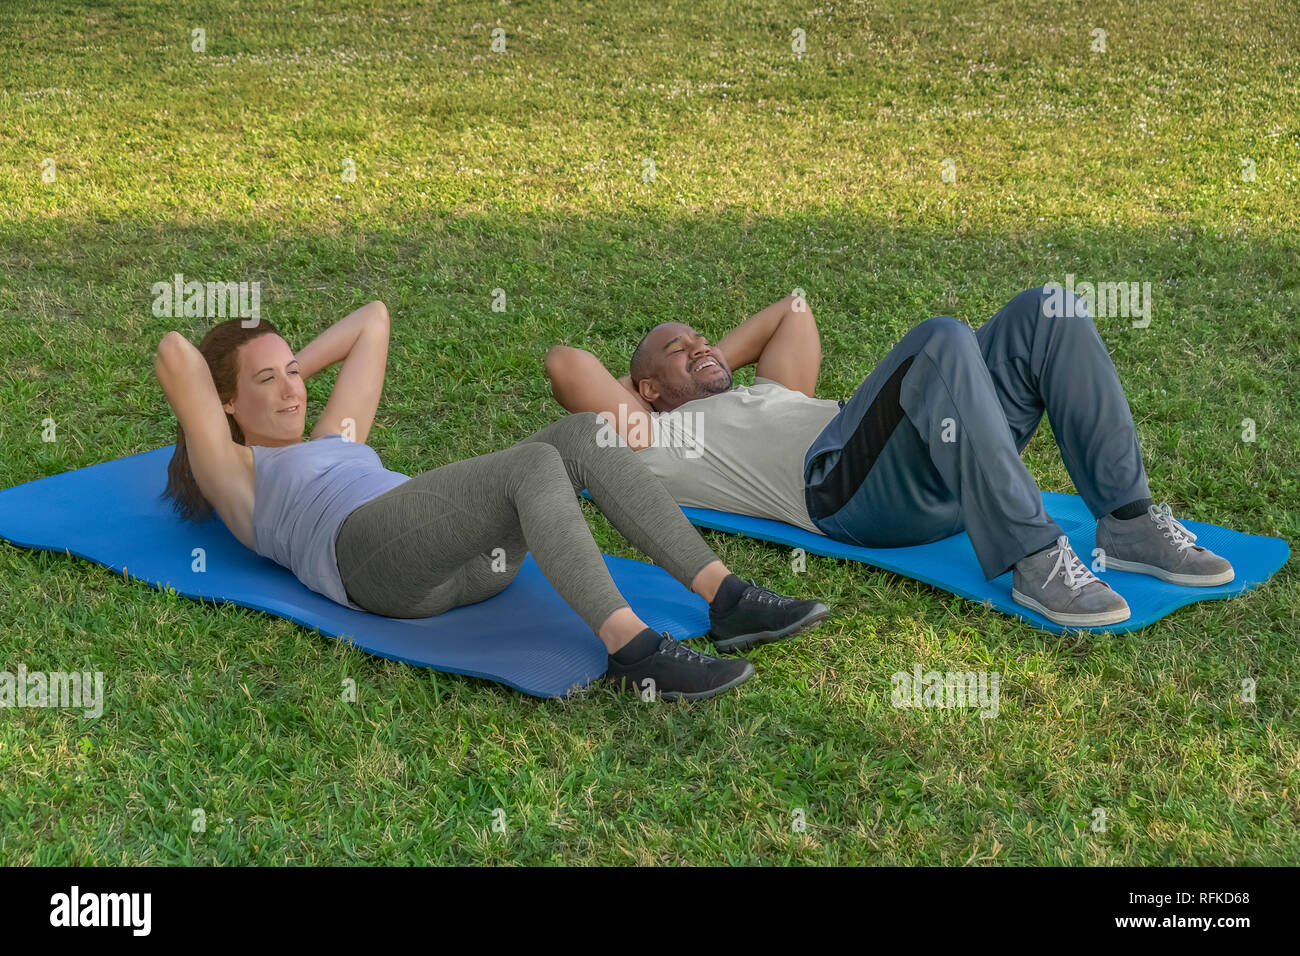 They start by doing situps on yoga mats on the grass as part of the exercise routine. Healthy living is important to a modern couple. Stock Photo